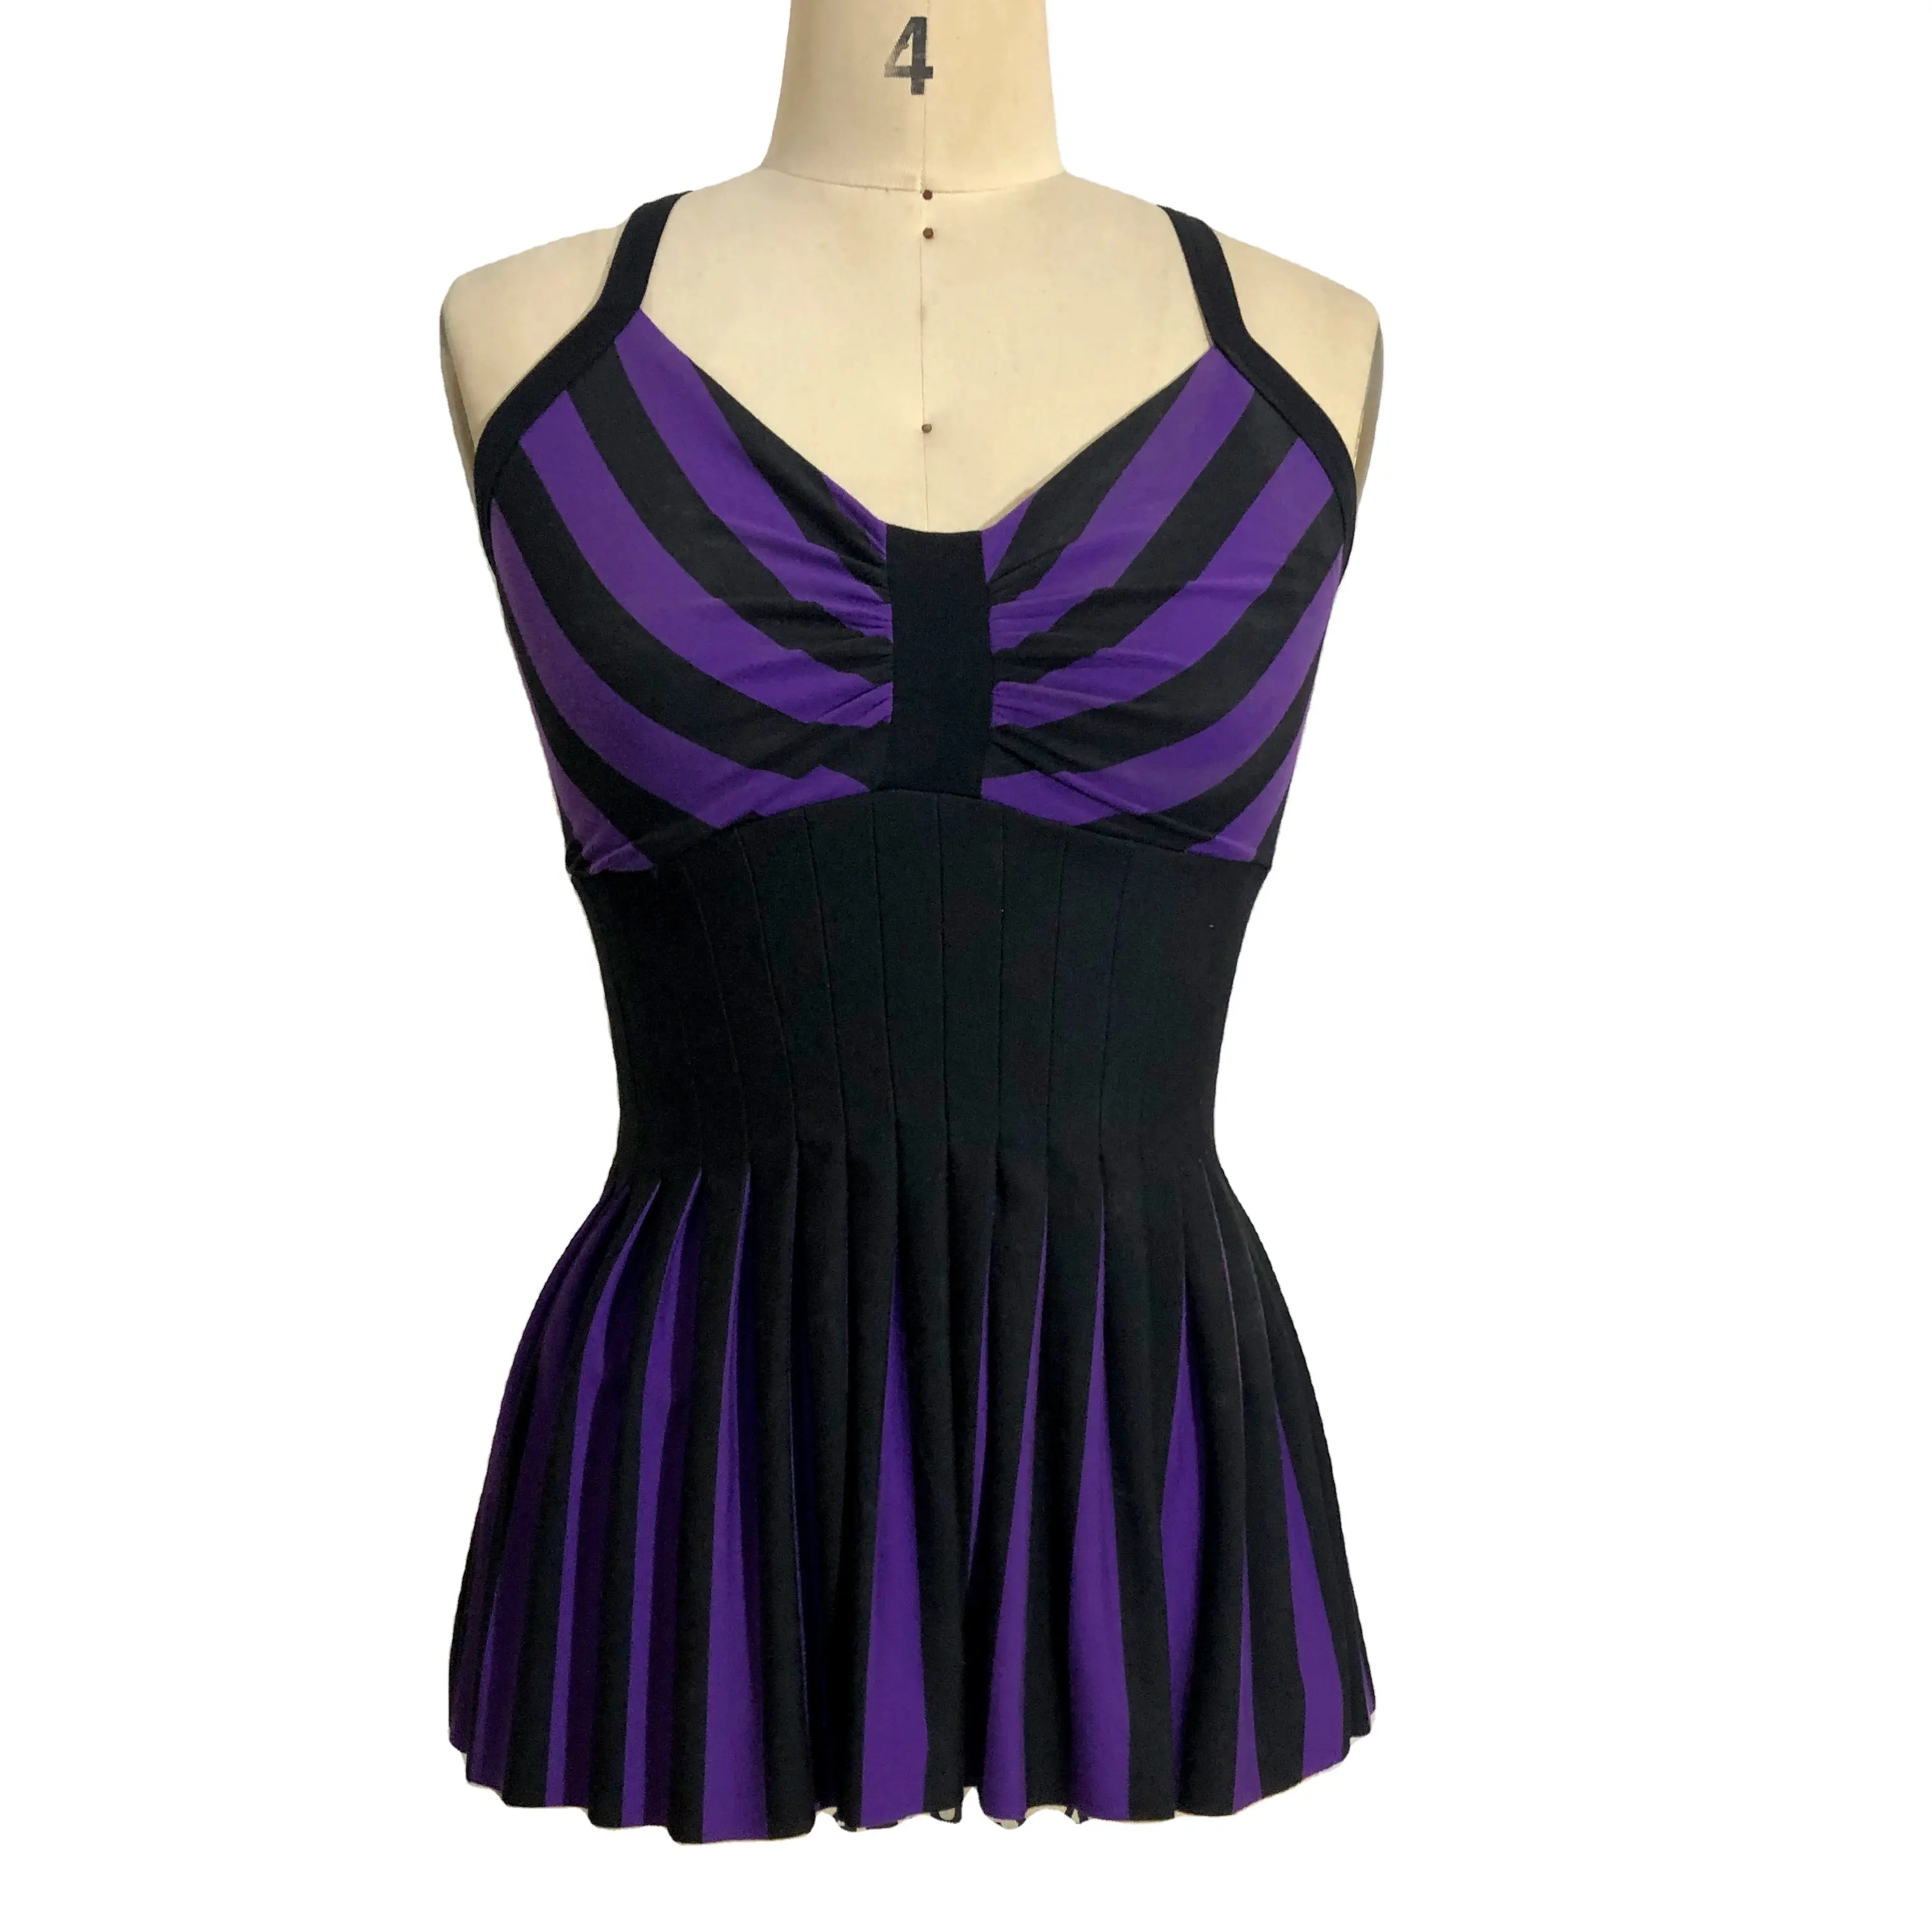 Custom Women's Camis Tops Black Purple Cross Halter Top Pleated Top Bows Sexy Colorful for Ladies New Summer Design Slim Fit